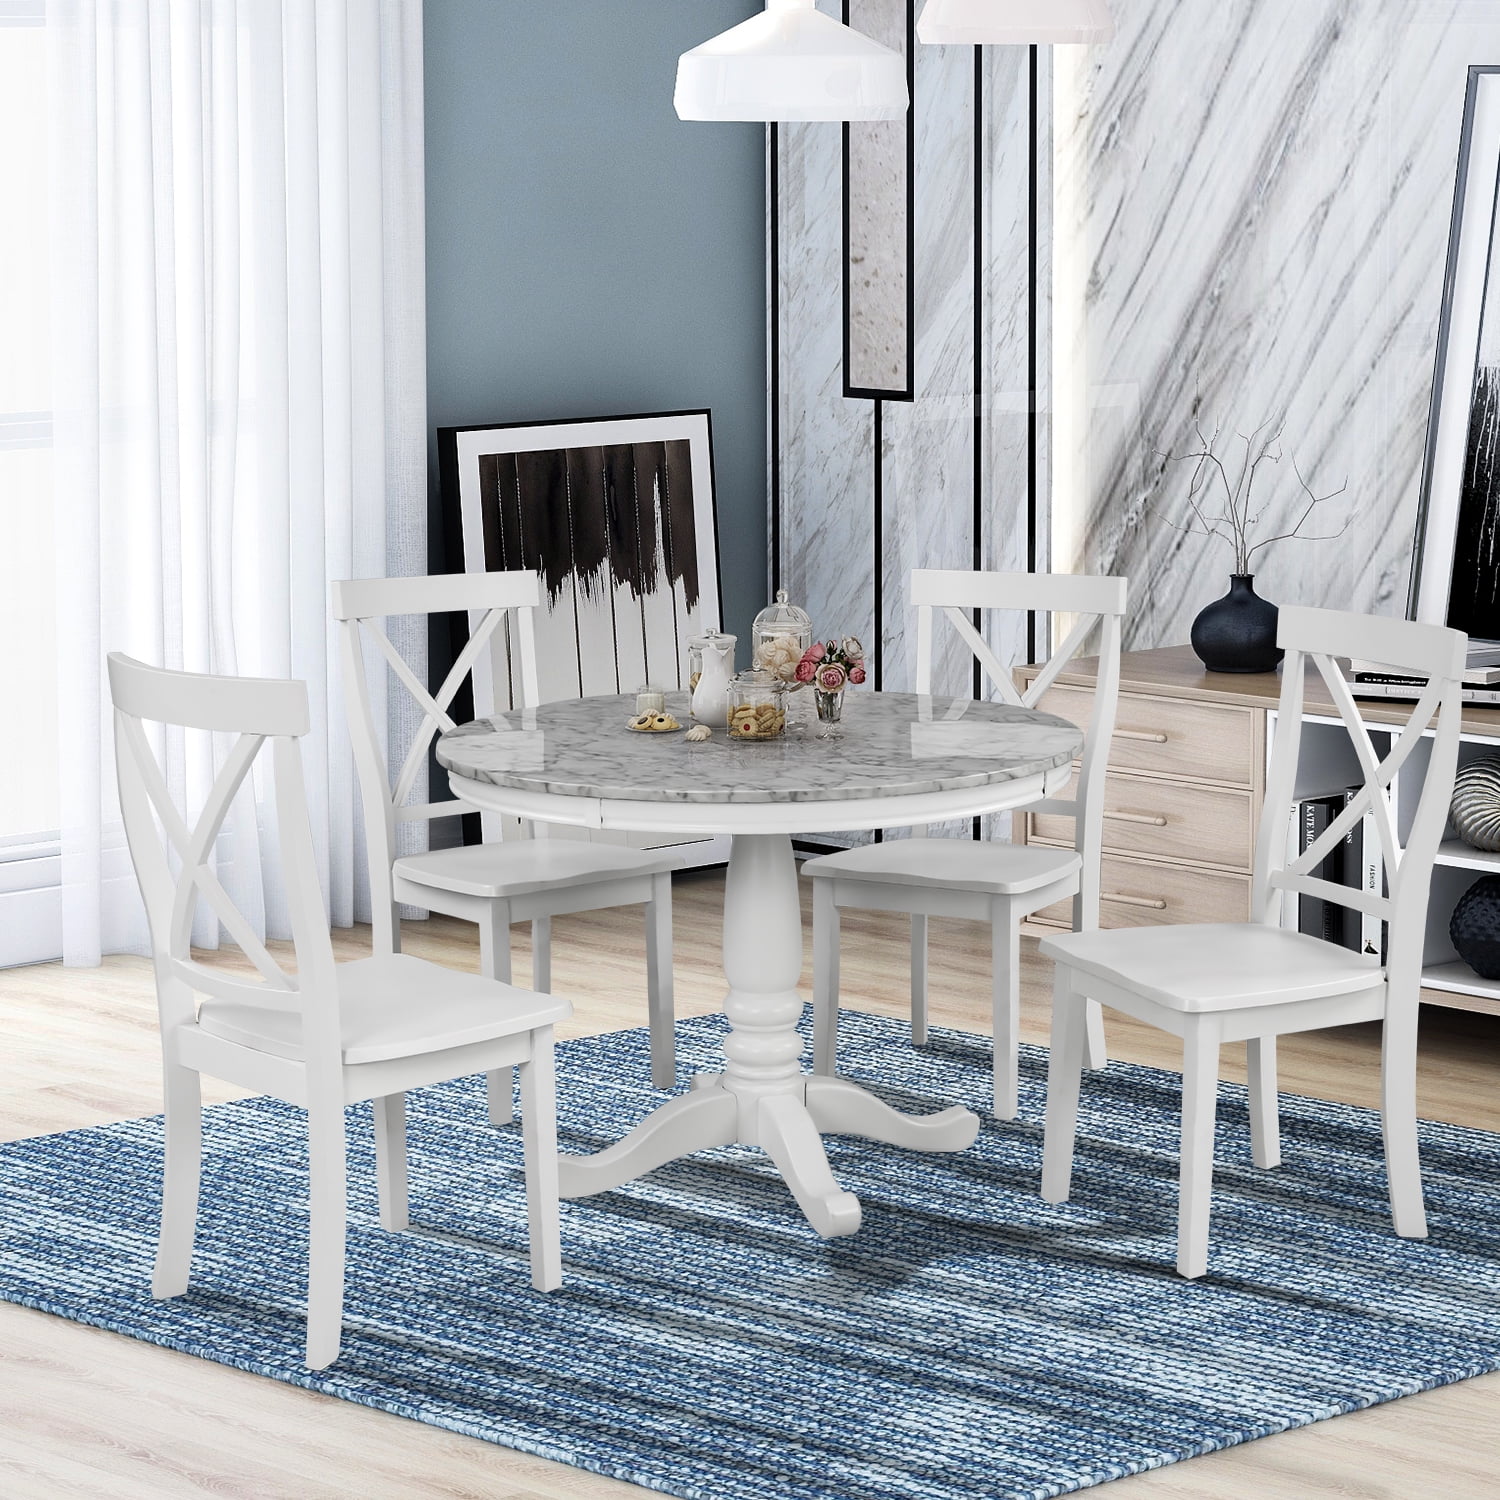 Urhomepro 42 Round Dining Table Set, White Round Dining Tables For 4